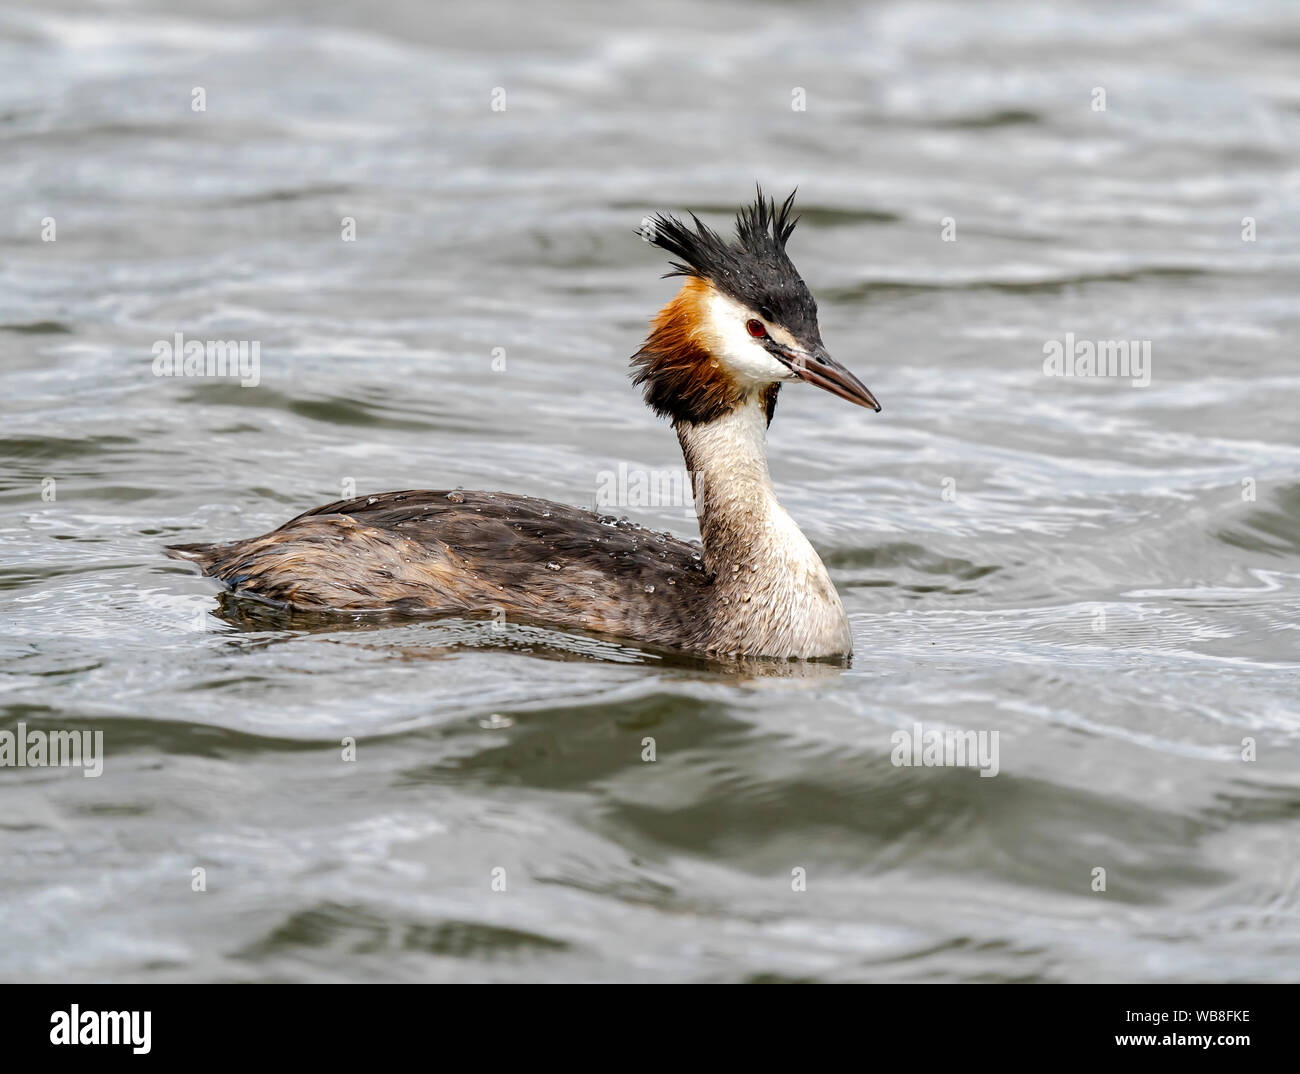 Great crested grebe on a lake Stock Photo